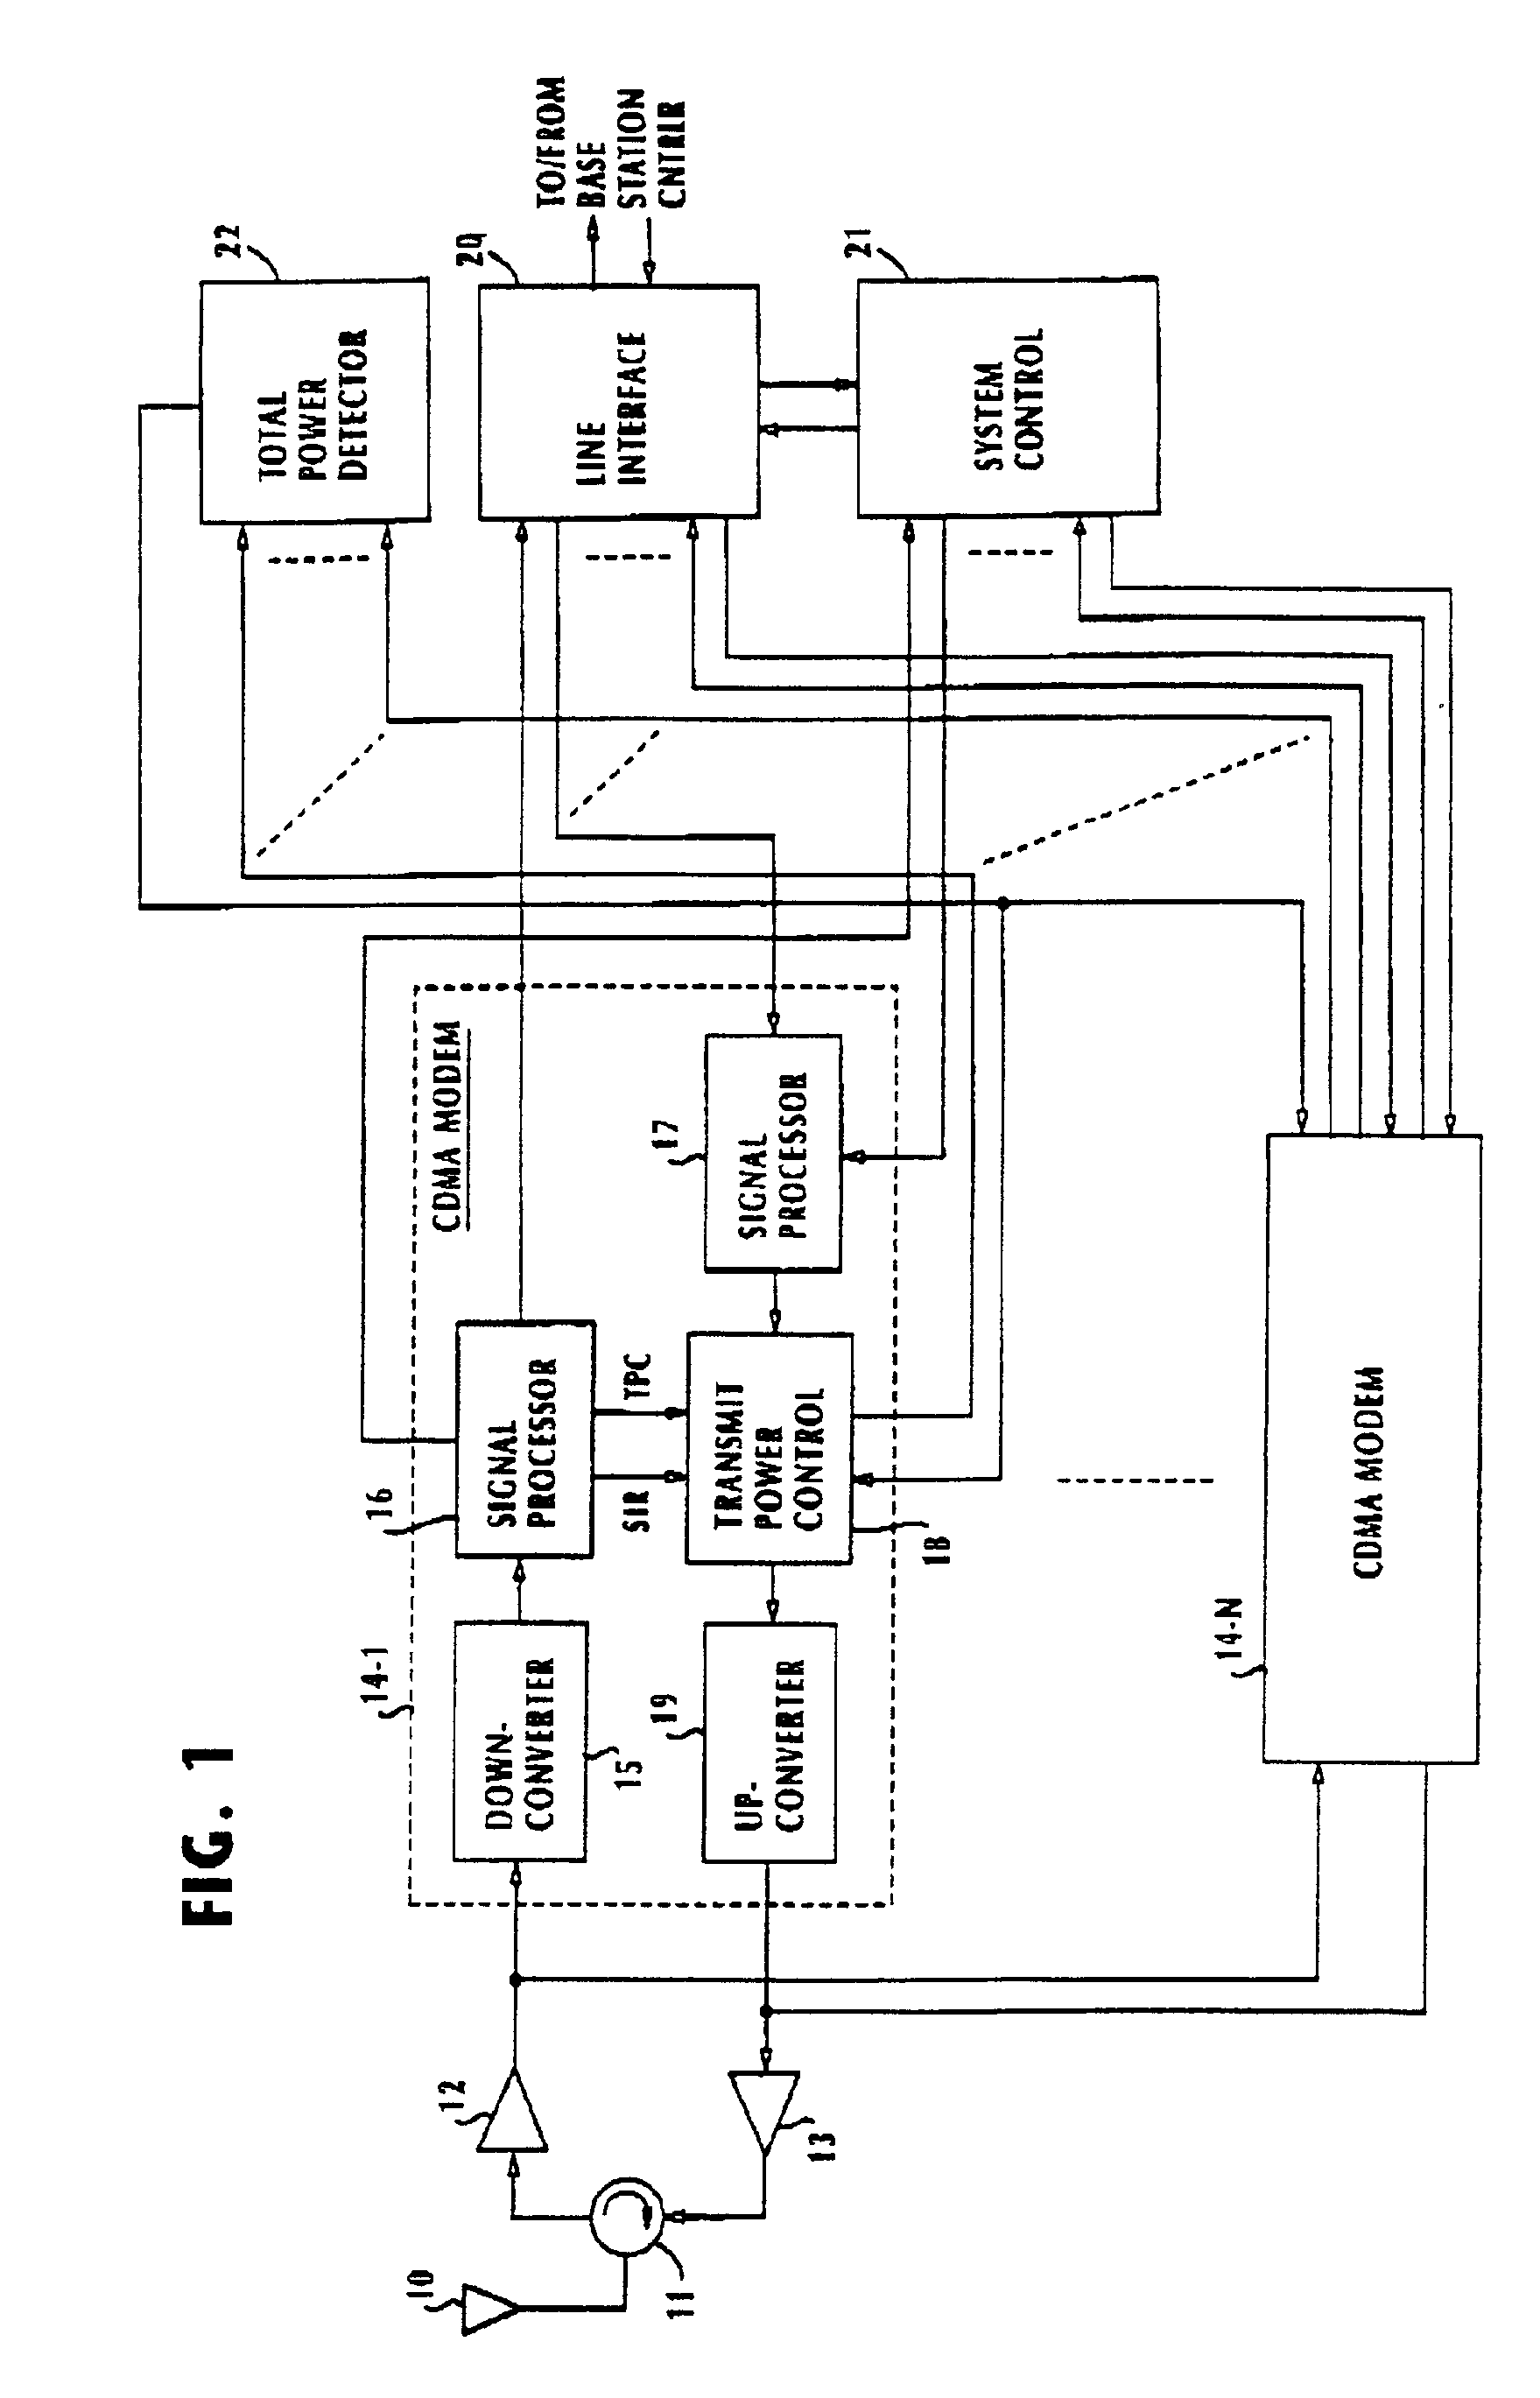 Downlink power control method and CDMA communication system incorporating the control method